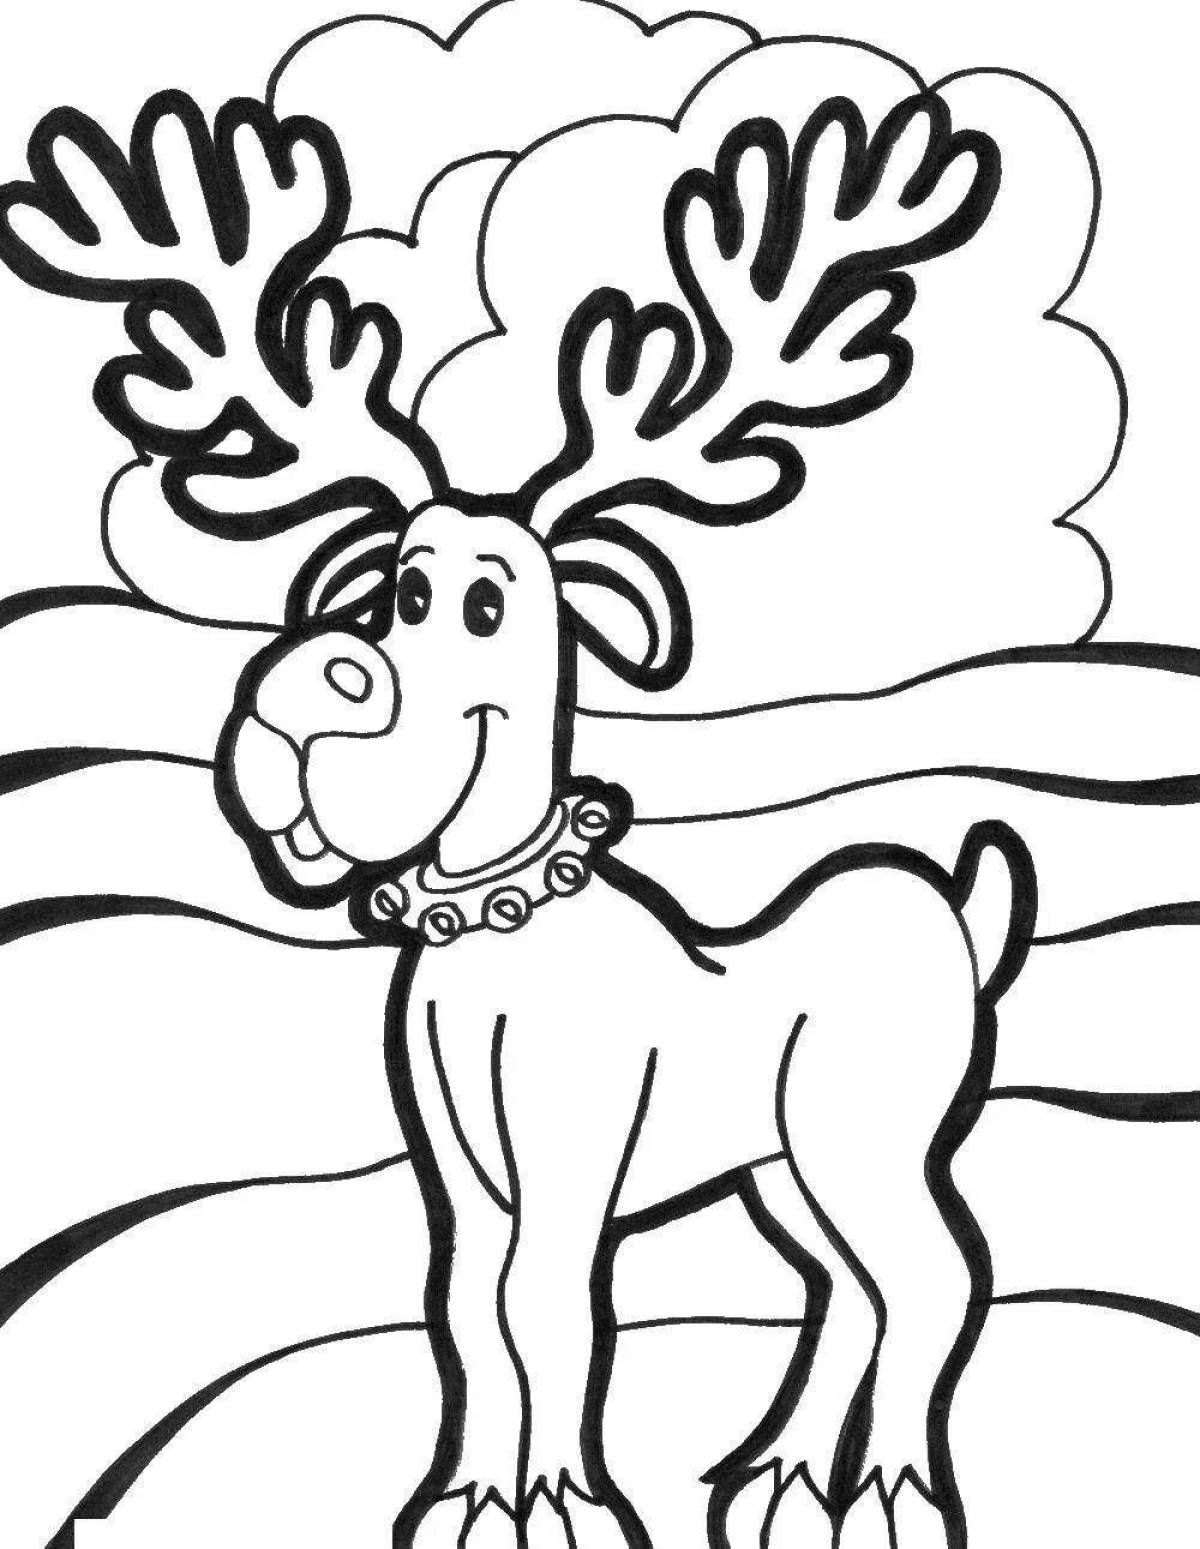 Adorable reindeer coloring page